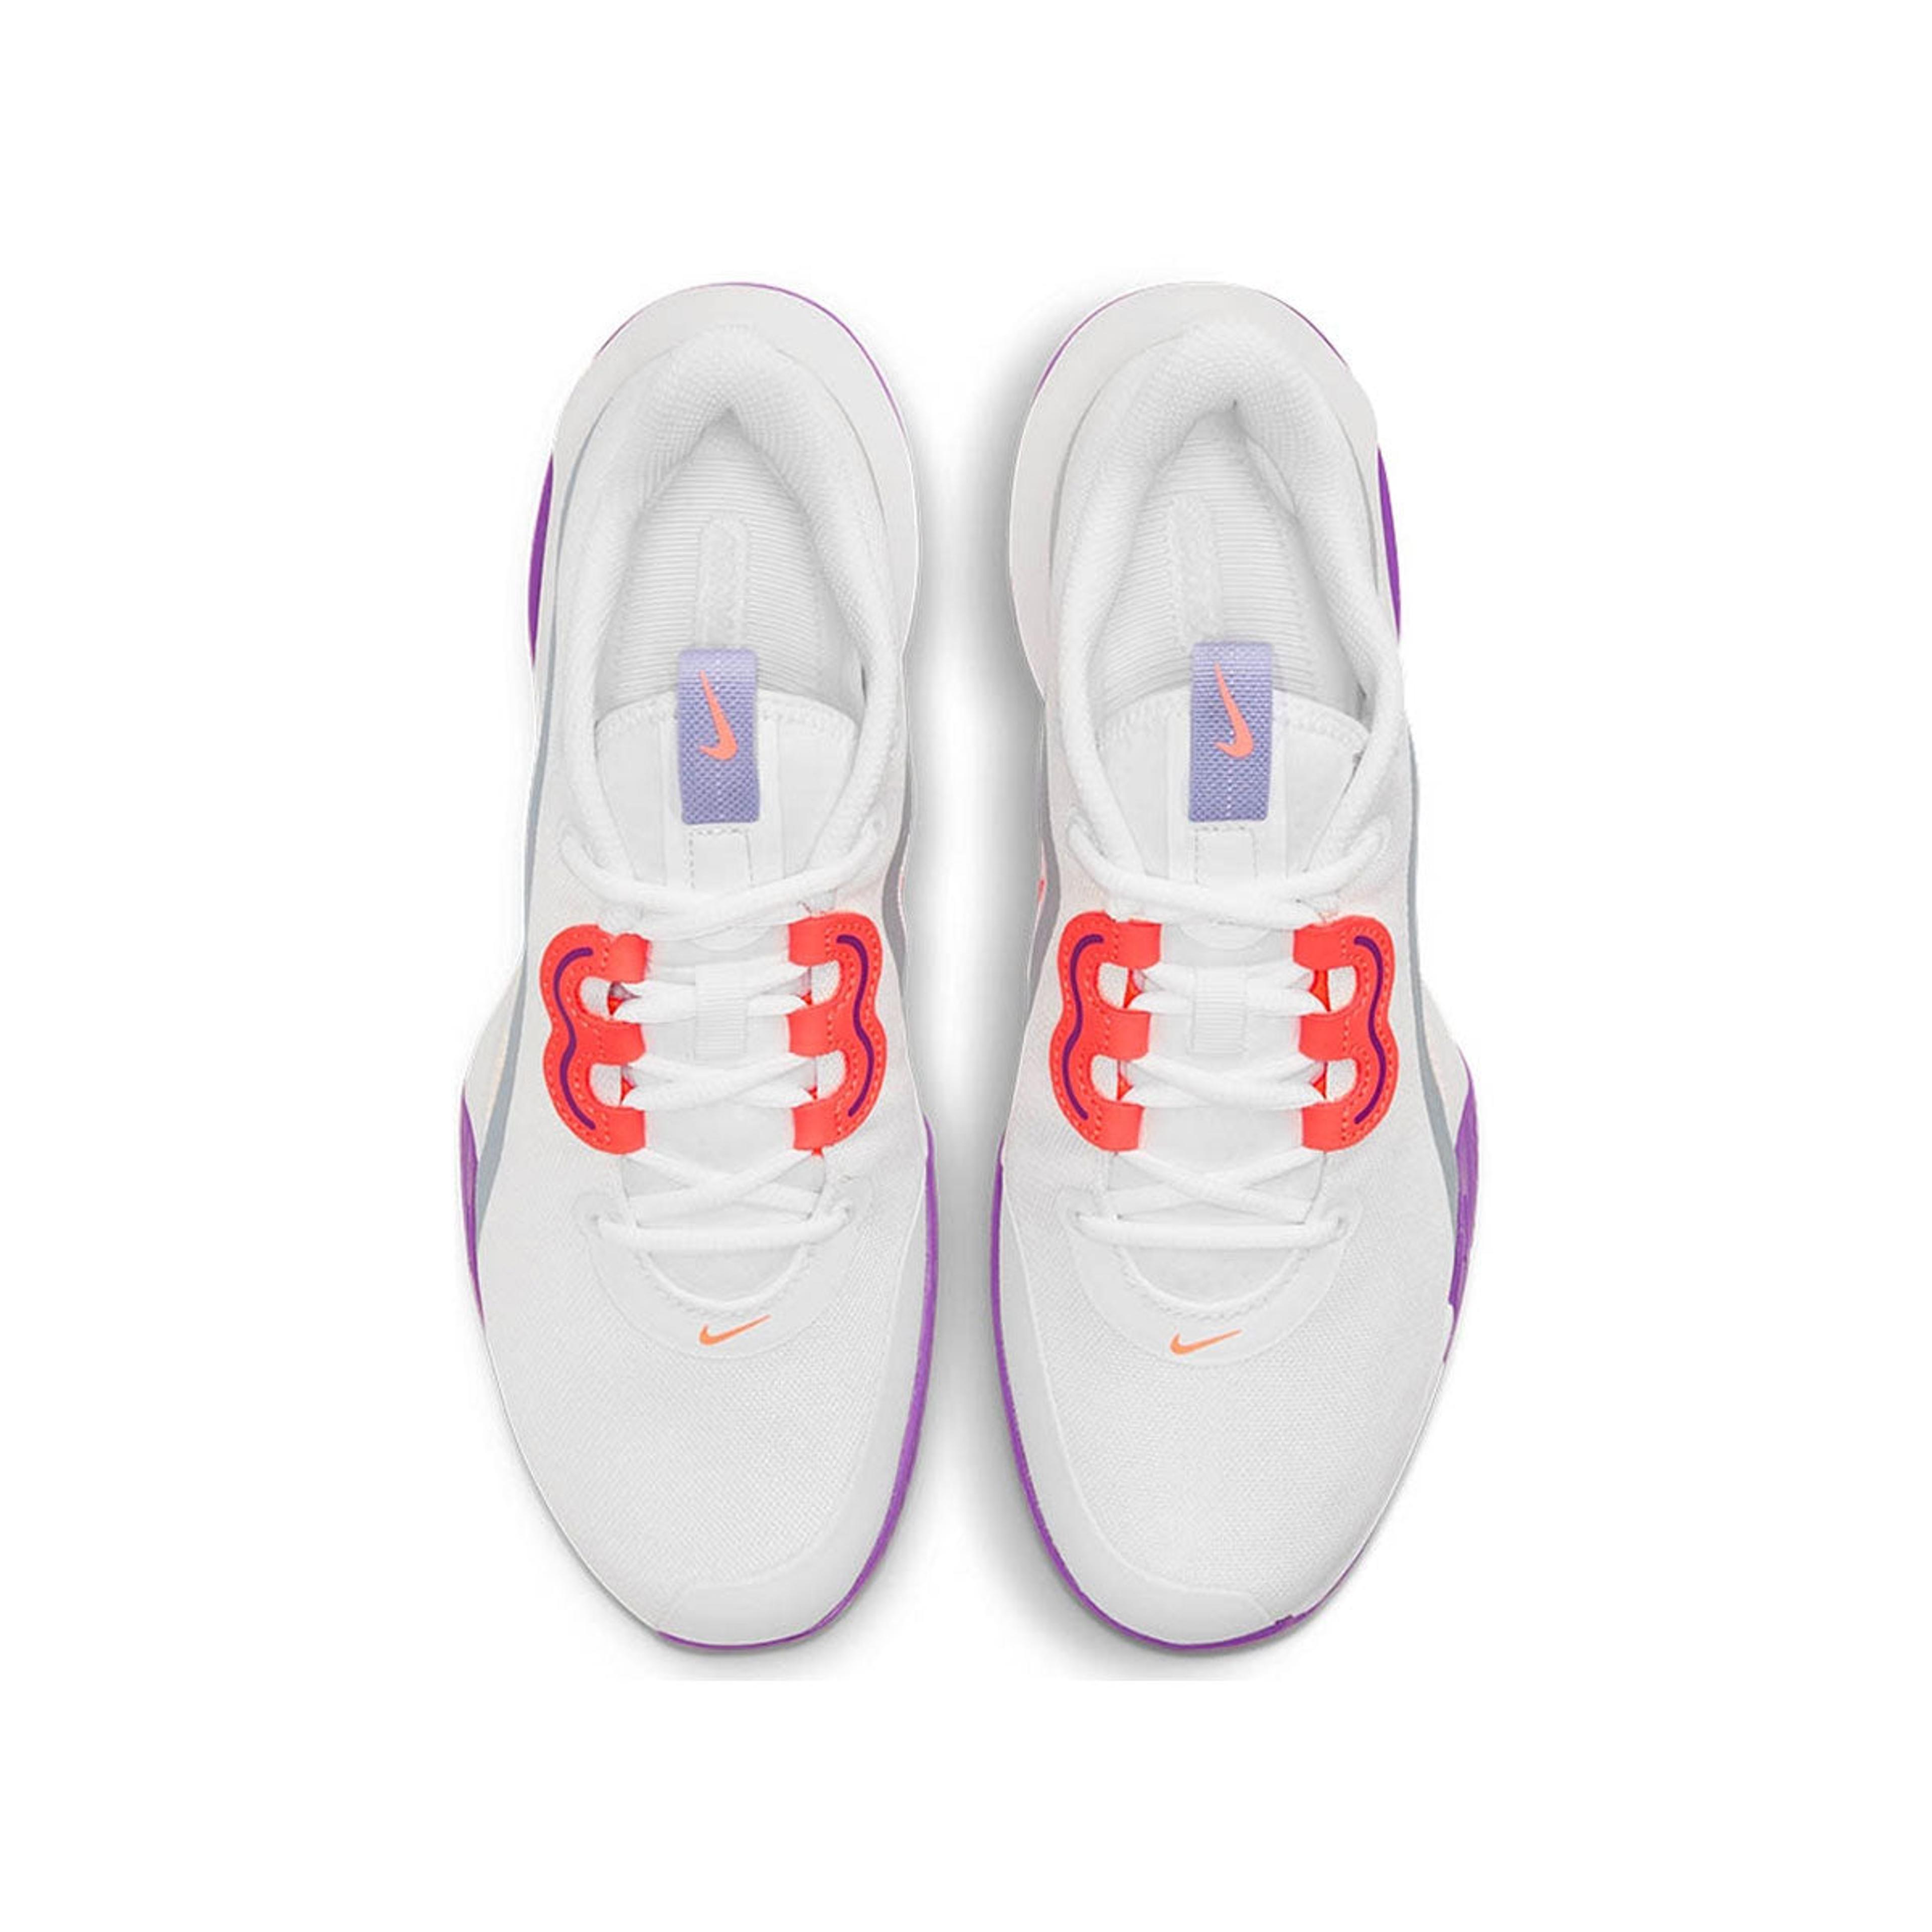 Alternate View 4 of Nike Women's Court Air Max Volley